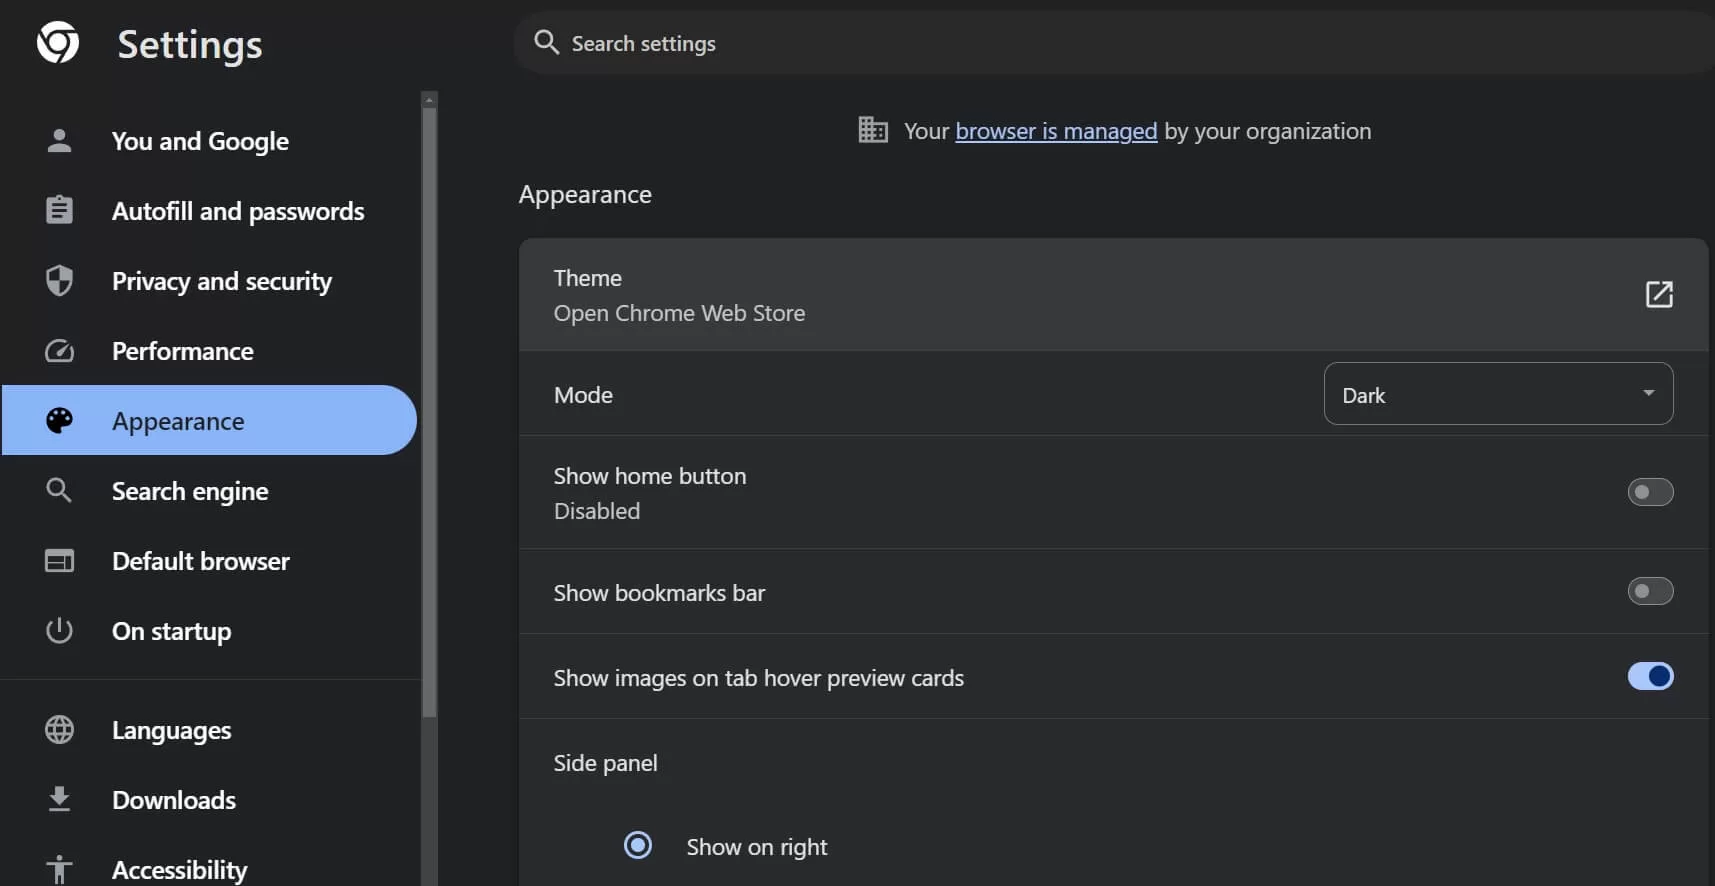 How to Change Chrome Background and On Dark Mode